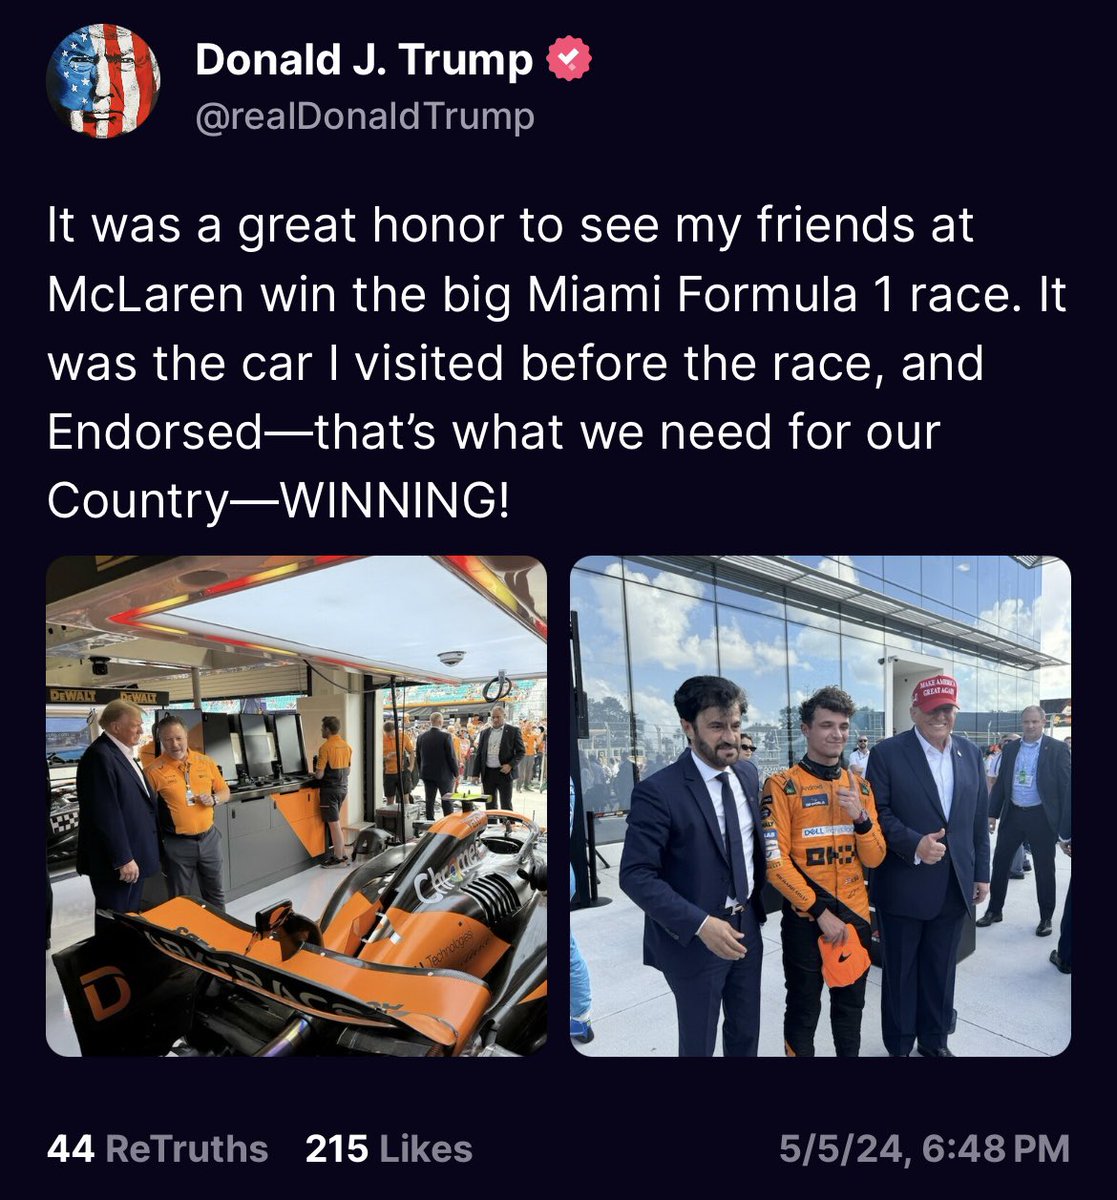 Donald Trump takes credit for Lando Norris’ Formula One win. Nice work by @McLarenF1 allowing yourself to get used by this huckster.